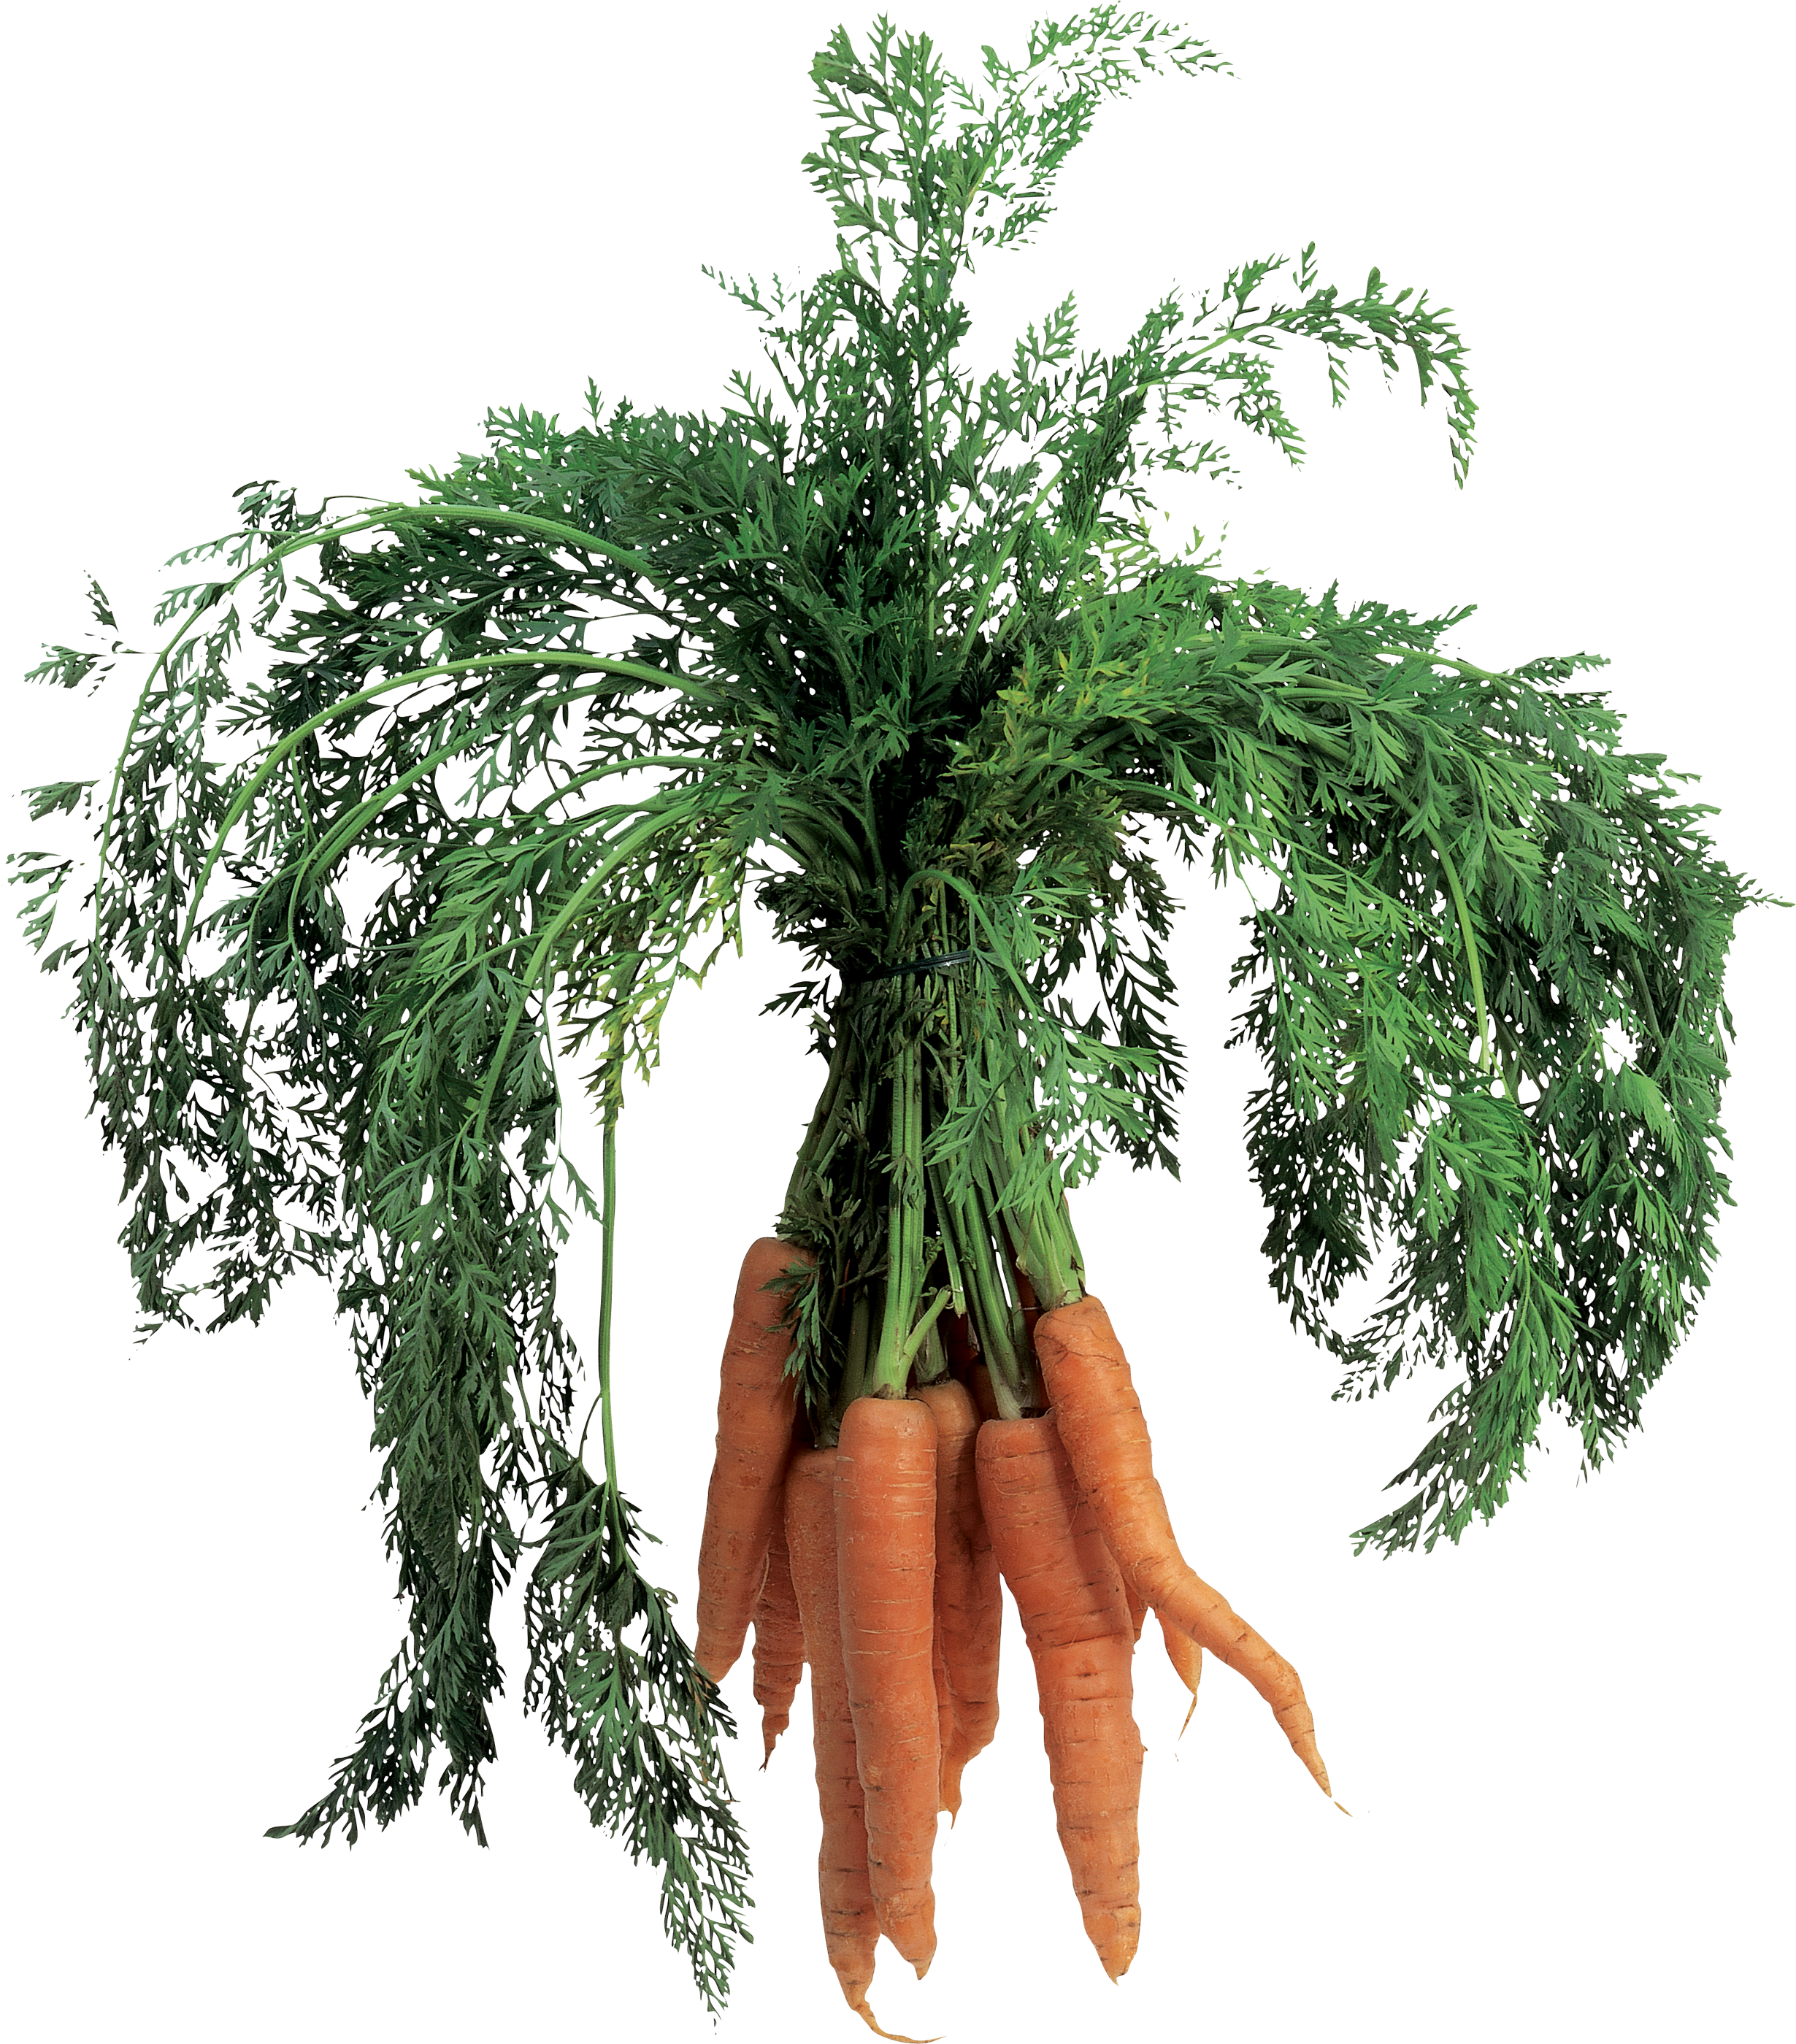 Carrot PNG images